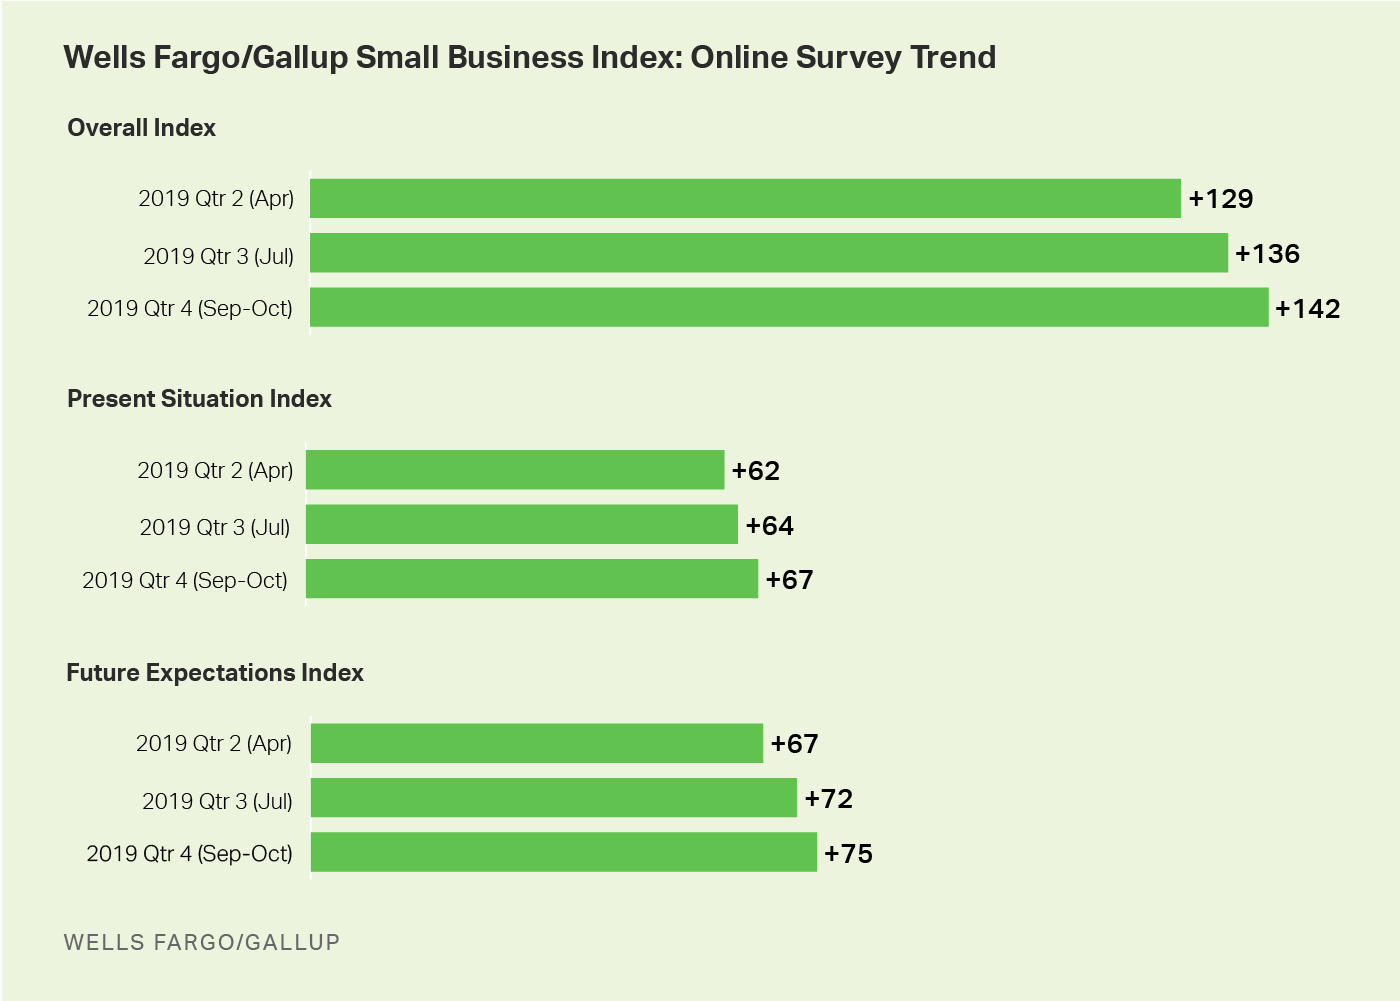 Bar graphs. American small business owners’ views of their current and future situations.